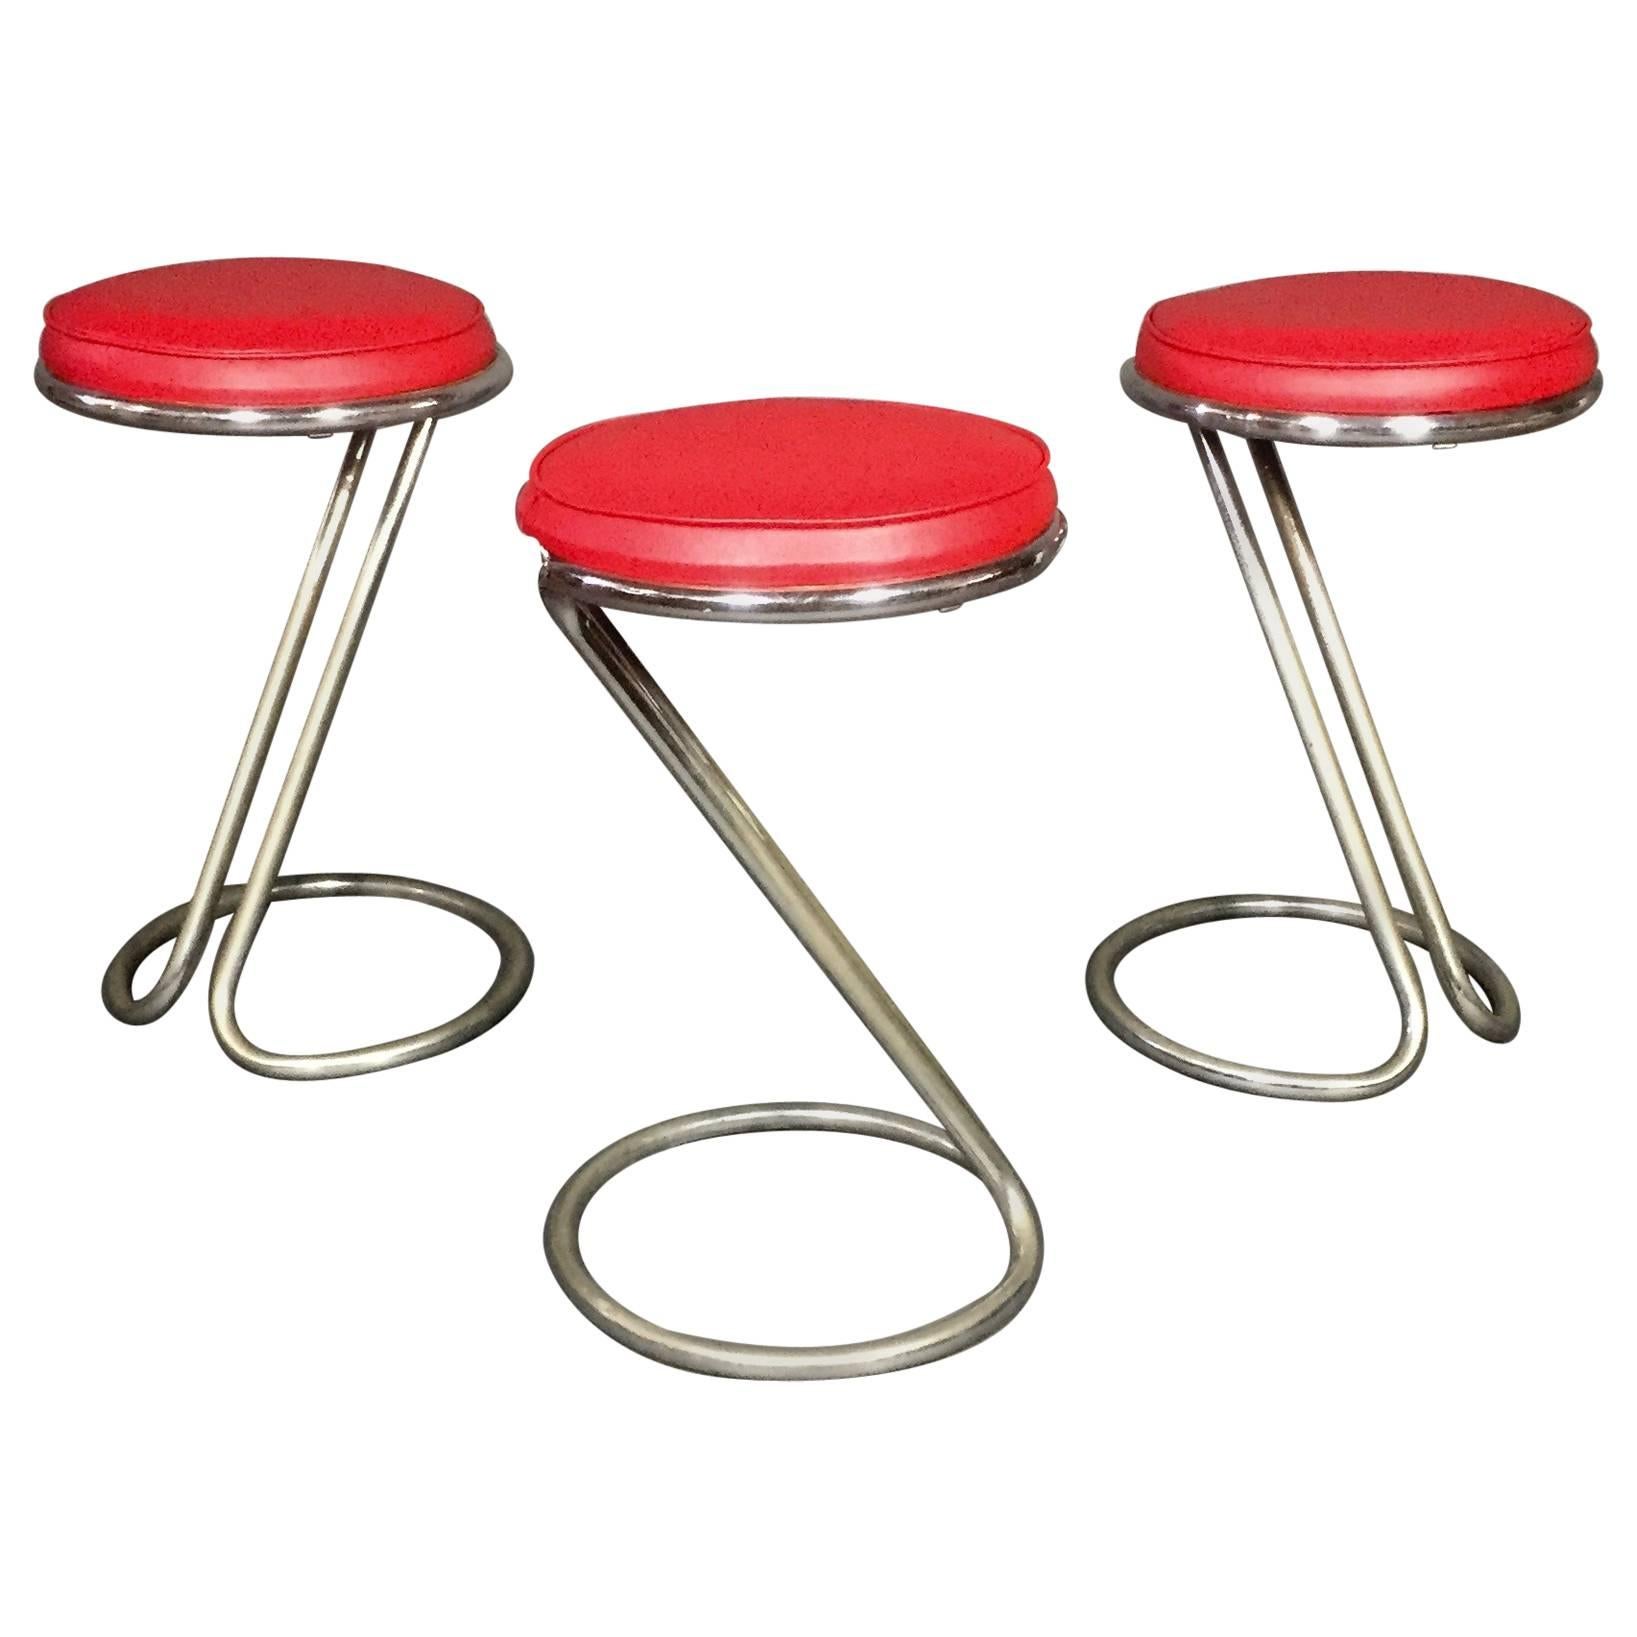 Classic Set of Z-Stools by Gilbert Rohde, USA, 1930s For Sale